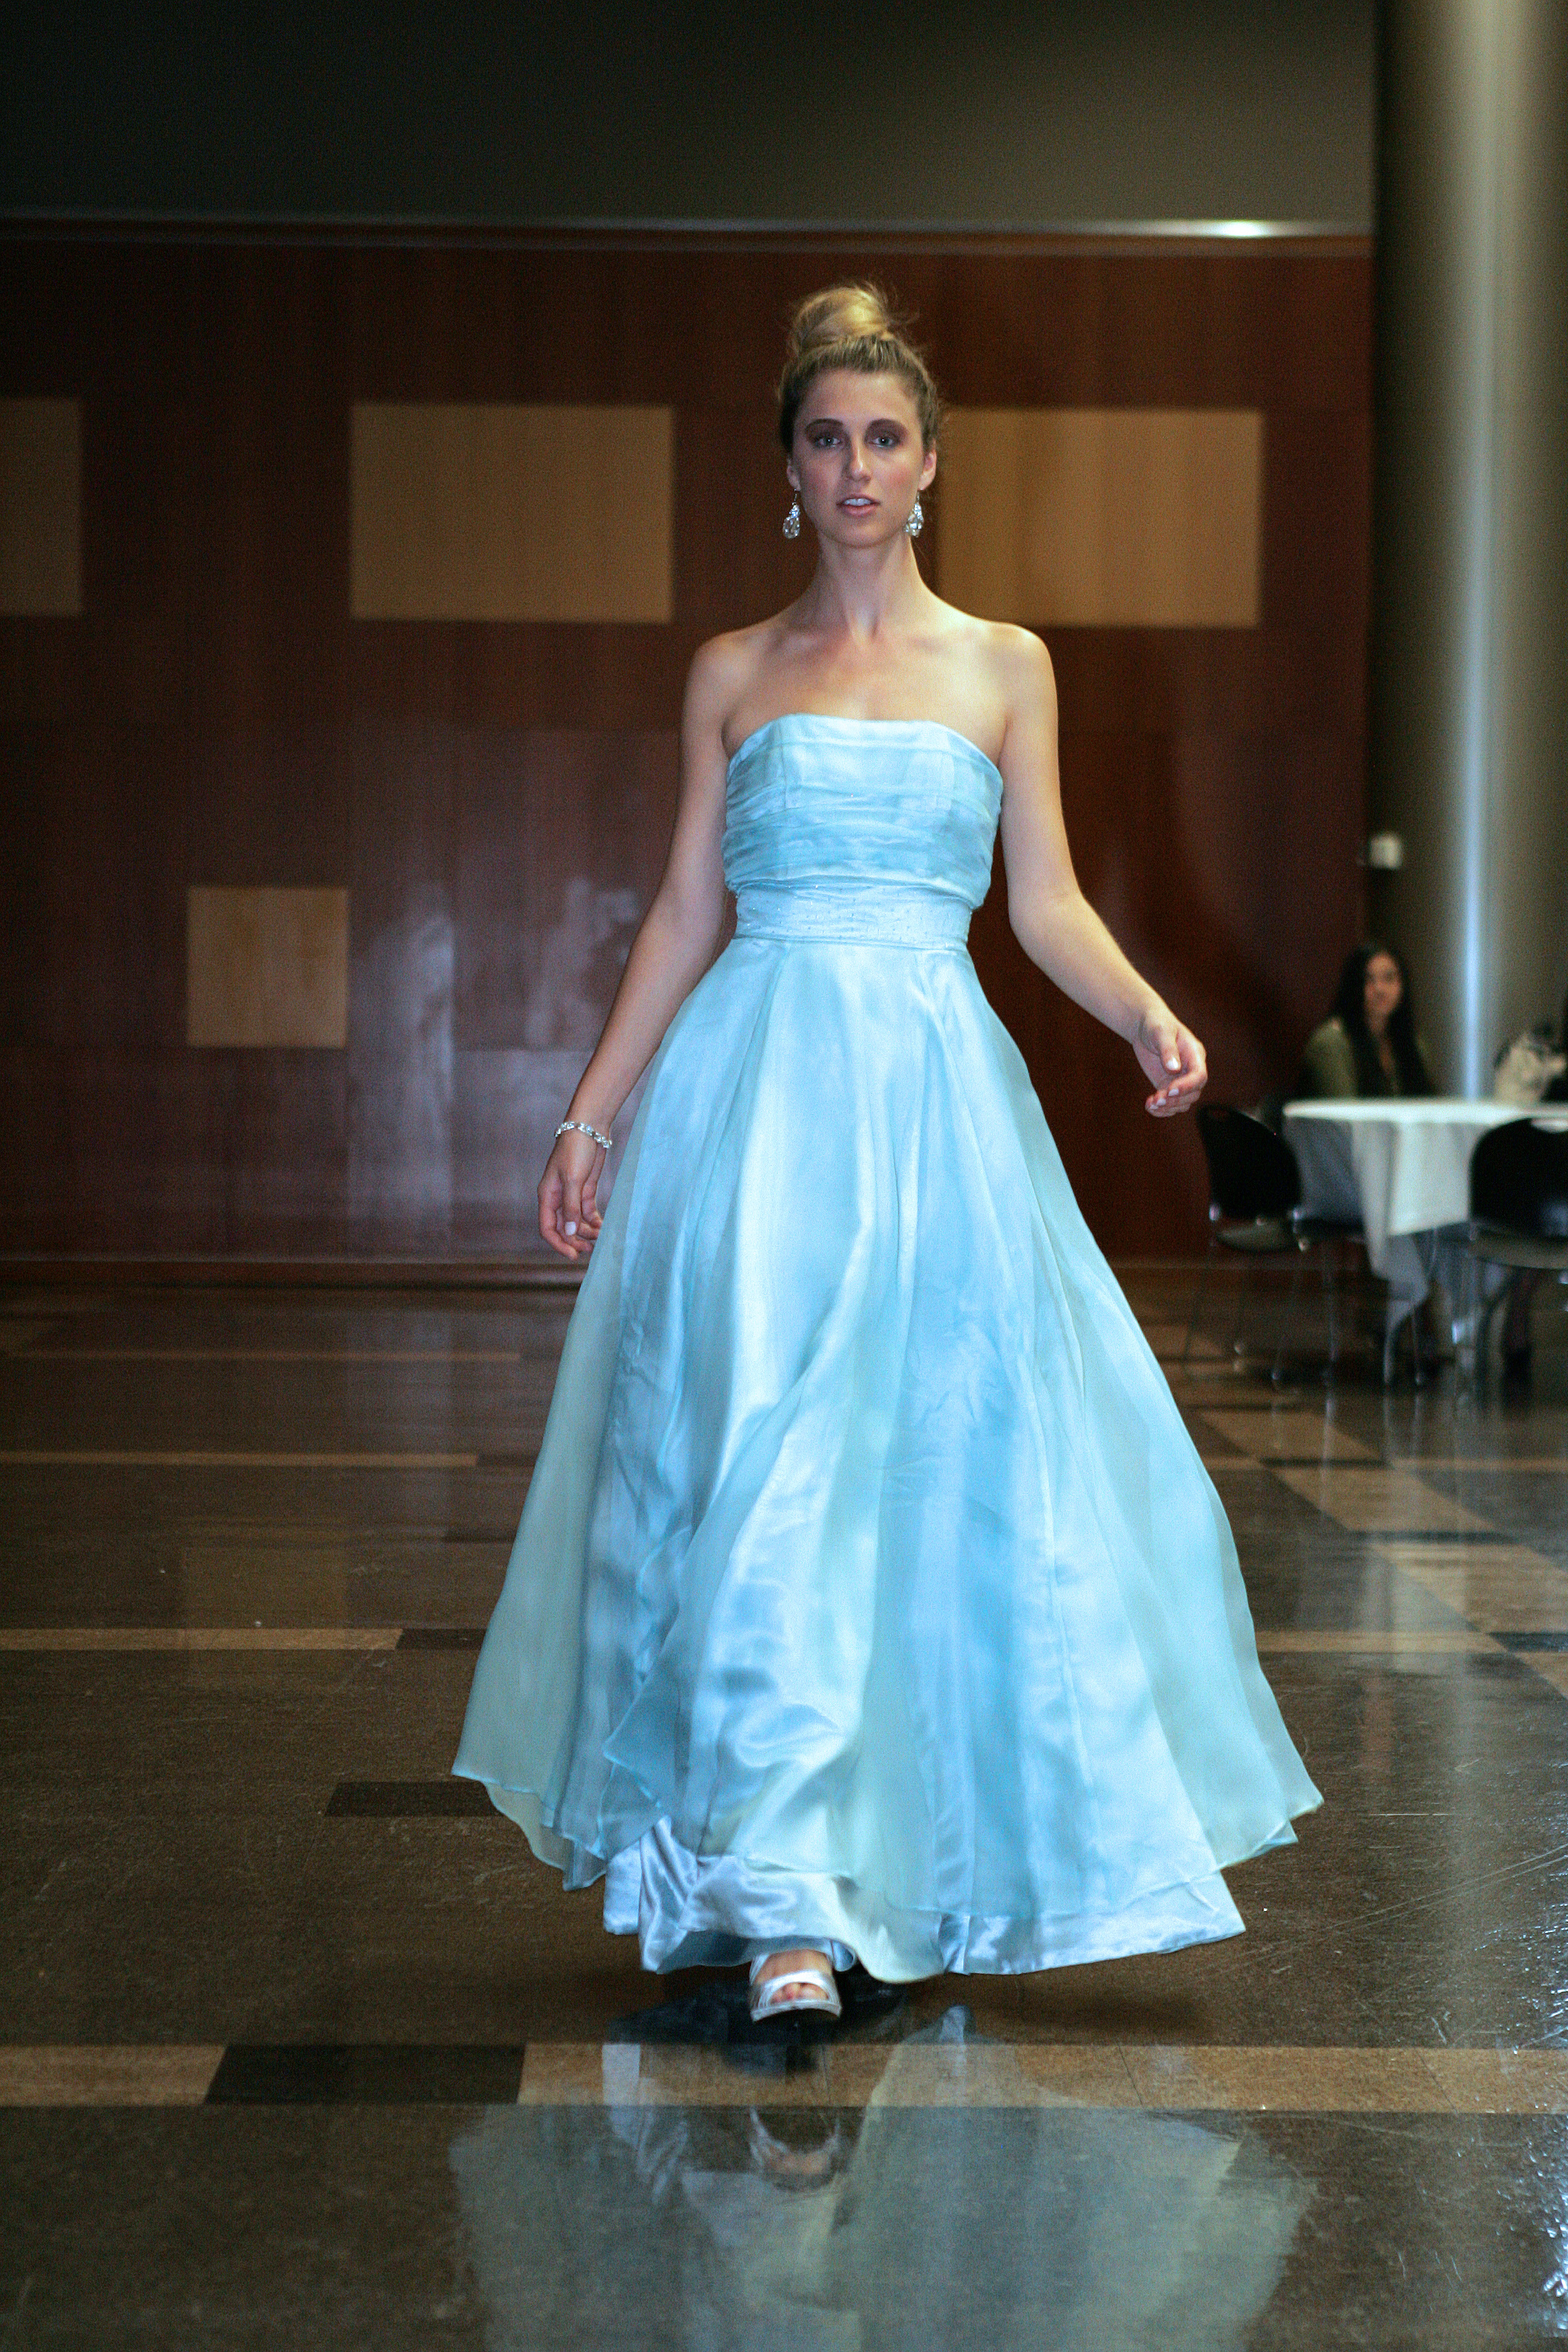 This glamorous blue dress, Grace, is from Tara Lynn's Vintage Bride Collection